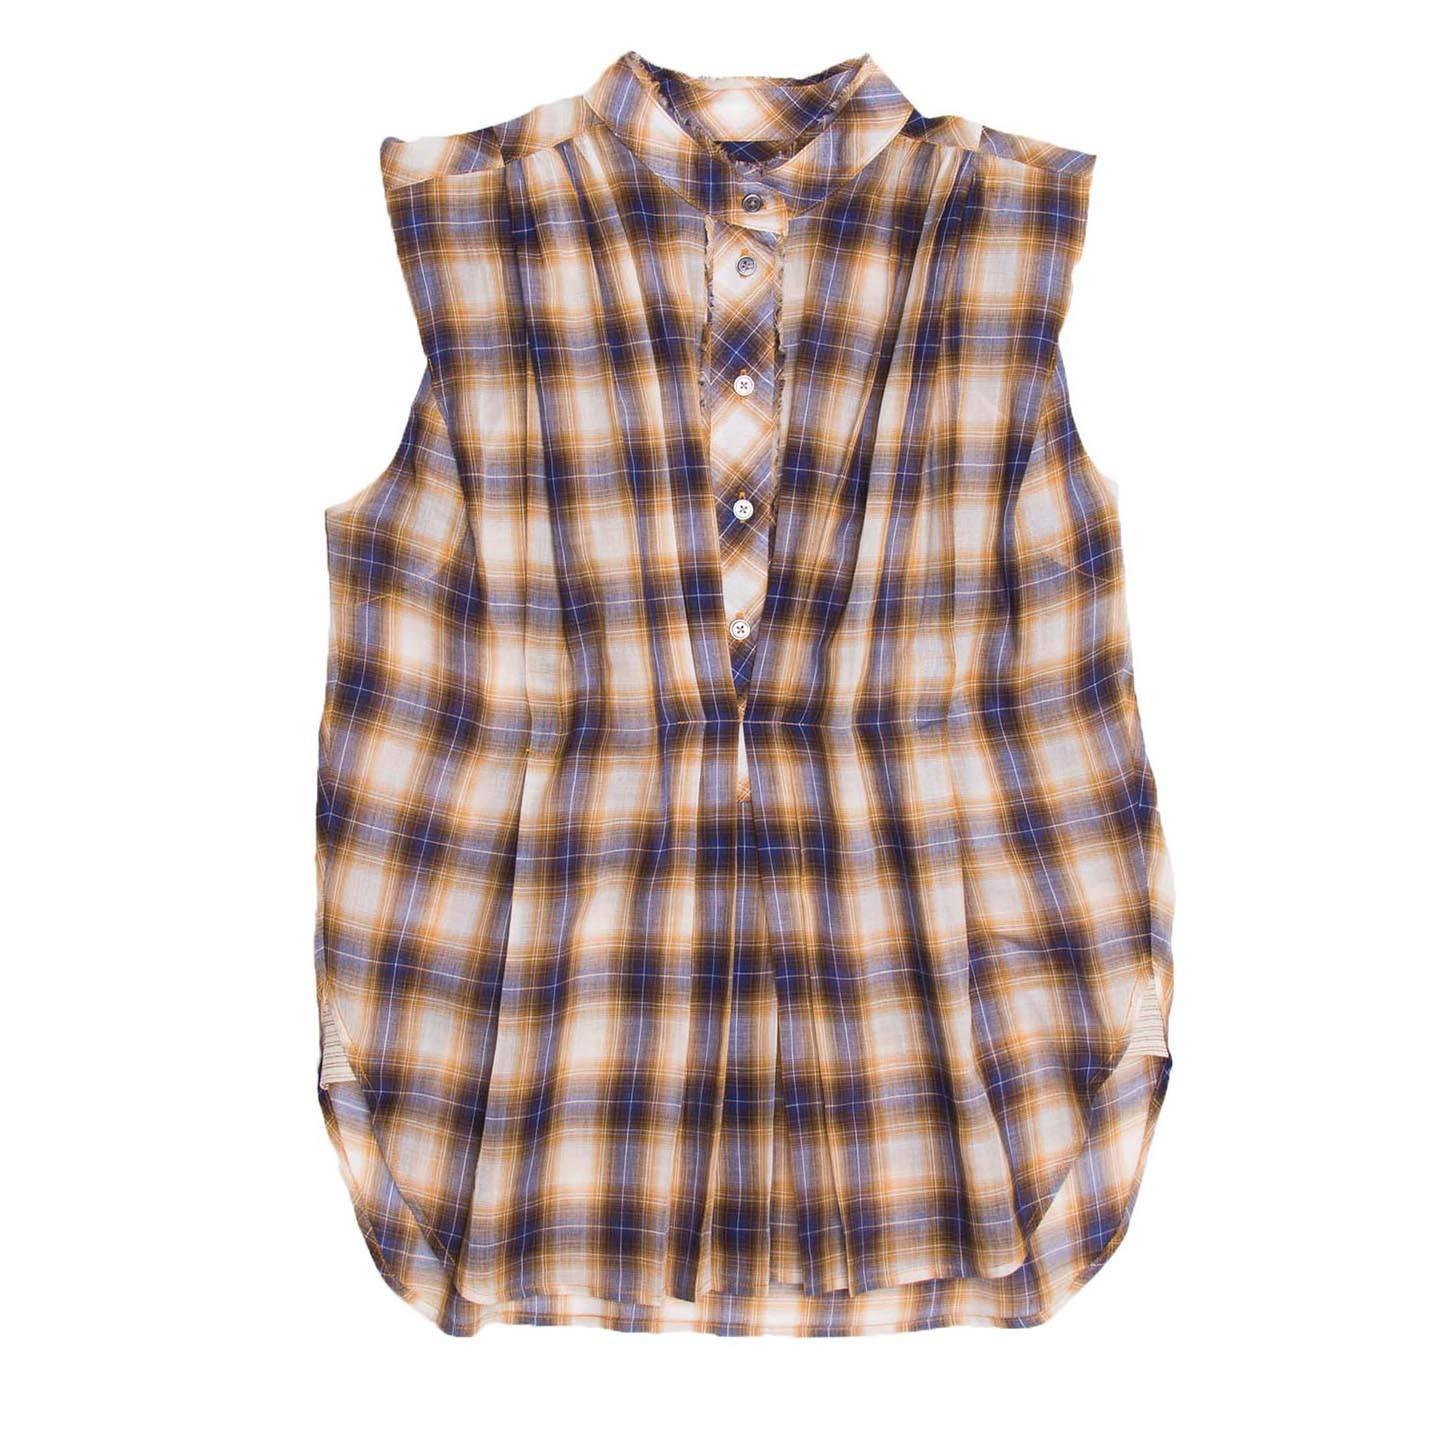 Golden, blue, orange and grey plaid cotton sleeveless shirt with raw edge inserts on Nehru collar and button placket. Round shaped hem with detailed side vents. Light pleats at front and little gathers at back give a soft volume to the